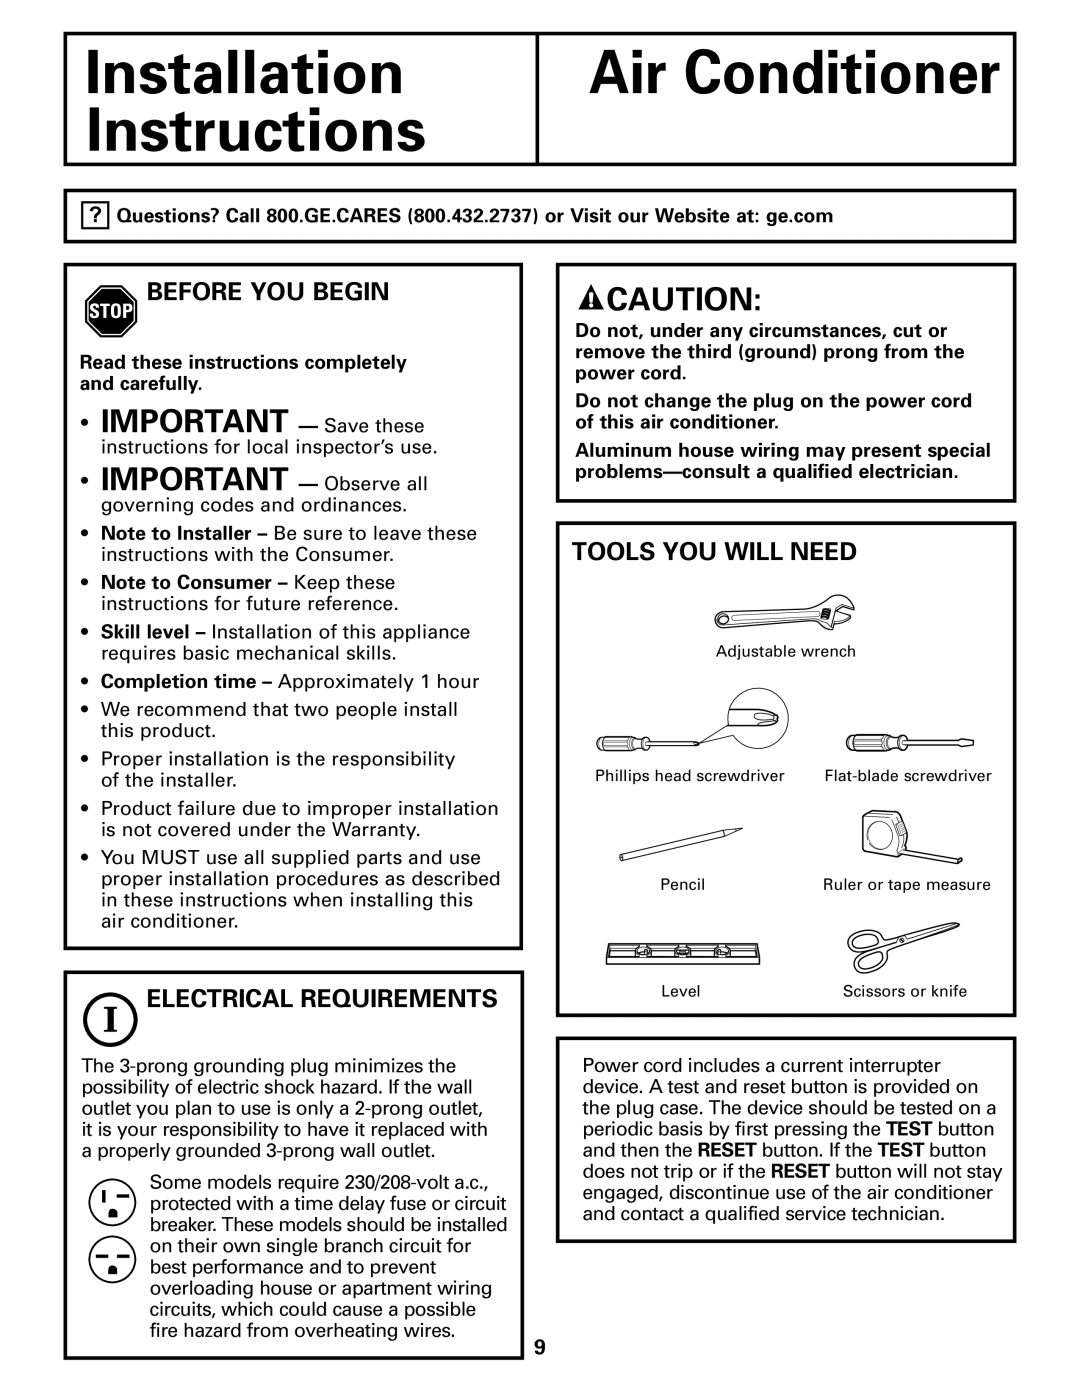 GE AEQ24 Installation Instructions, Air Conditioner, IMPORTANT - Save these, Before You Begin, Electrical Requirements 